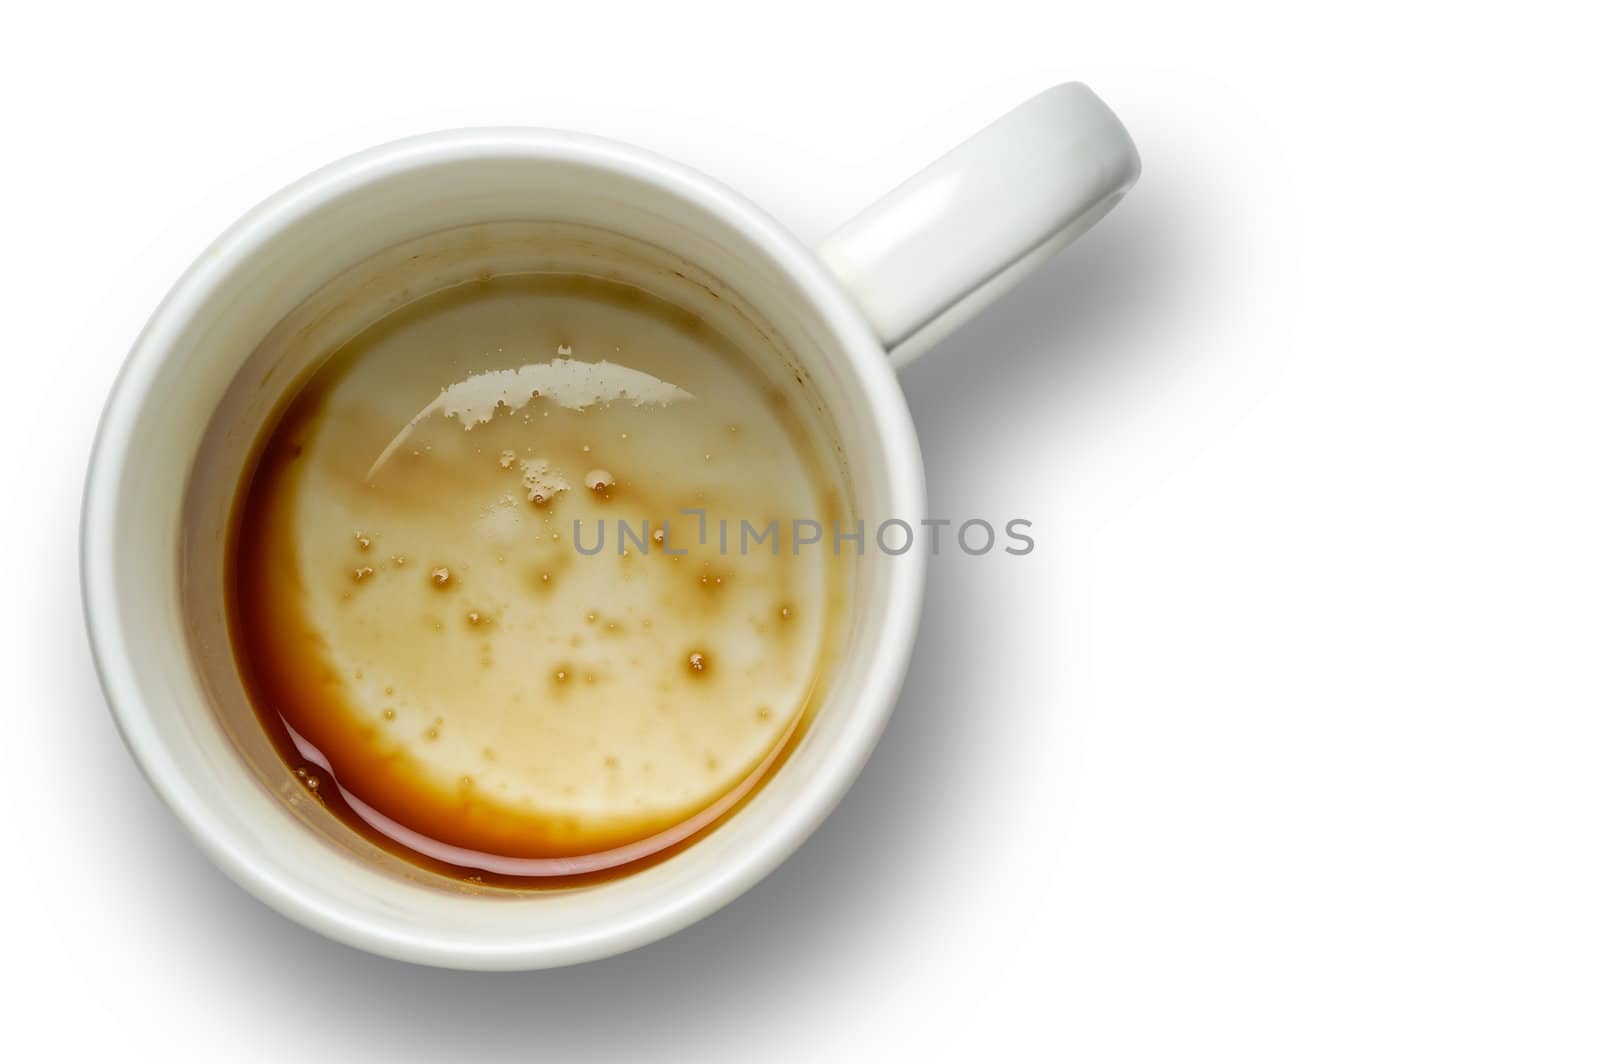 Empty coffee cup with clipping path by Laborer